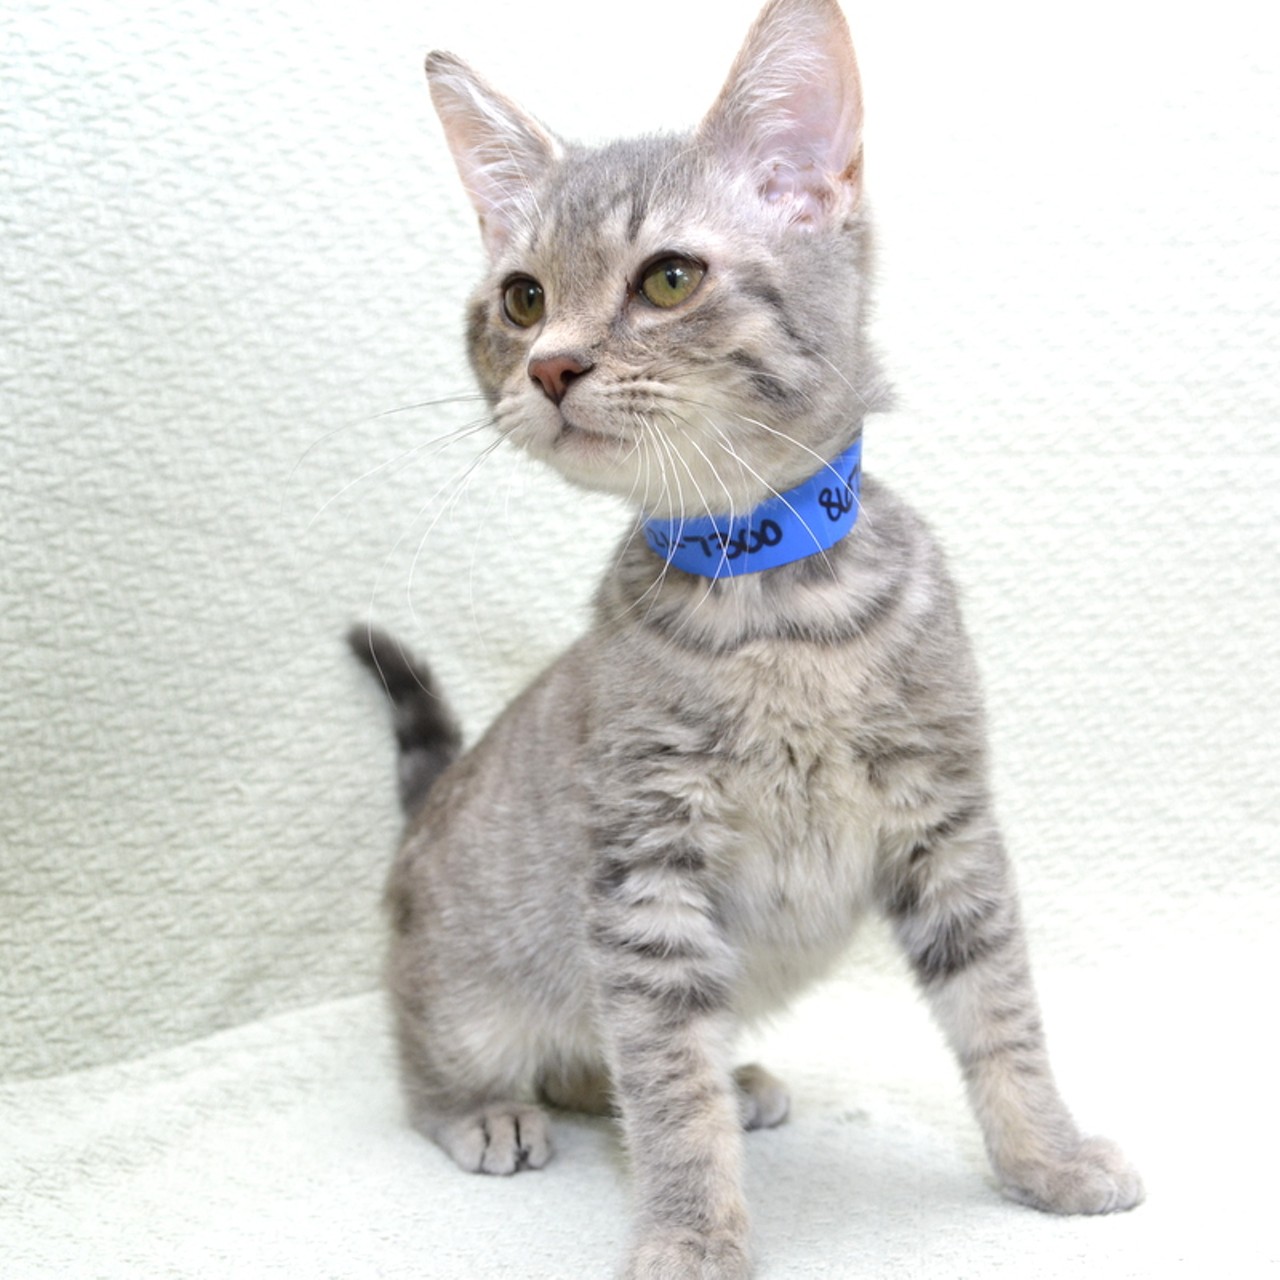 NAME:  Dallas Green
GENDER: Male
BREED: Domestic Short Hair
AGE: 5 months
WEIGHT: 3 pounds
SPECIAL CONSIDERATIONS: Prefers a home with older or no children
REASON I CAME TO MHS: Rescued in Westland
LOCATION: Premier Pet Supply of Novi
ID NUMBER: 867558